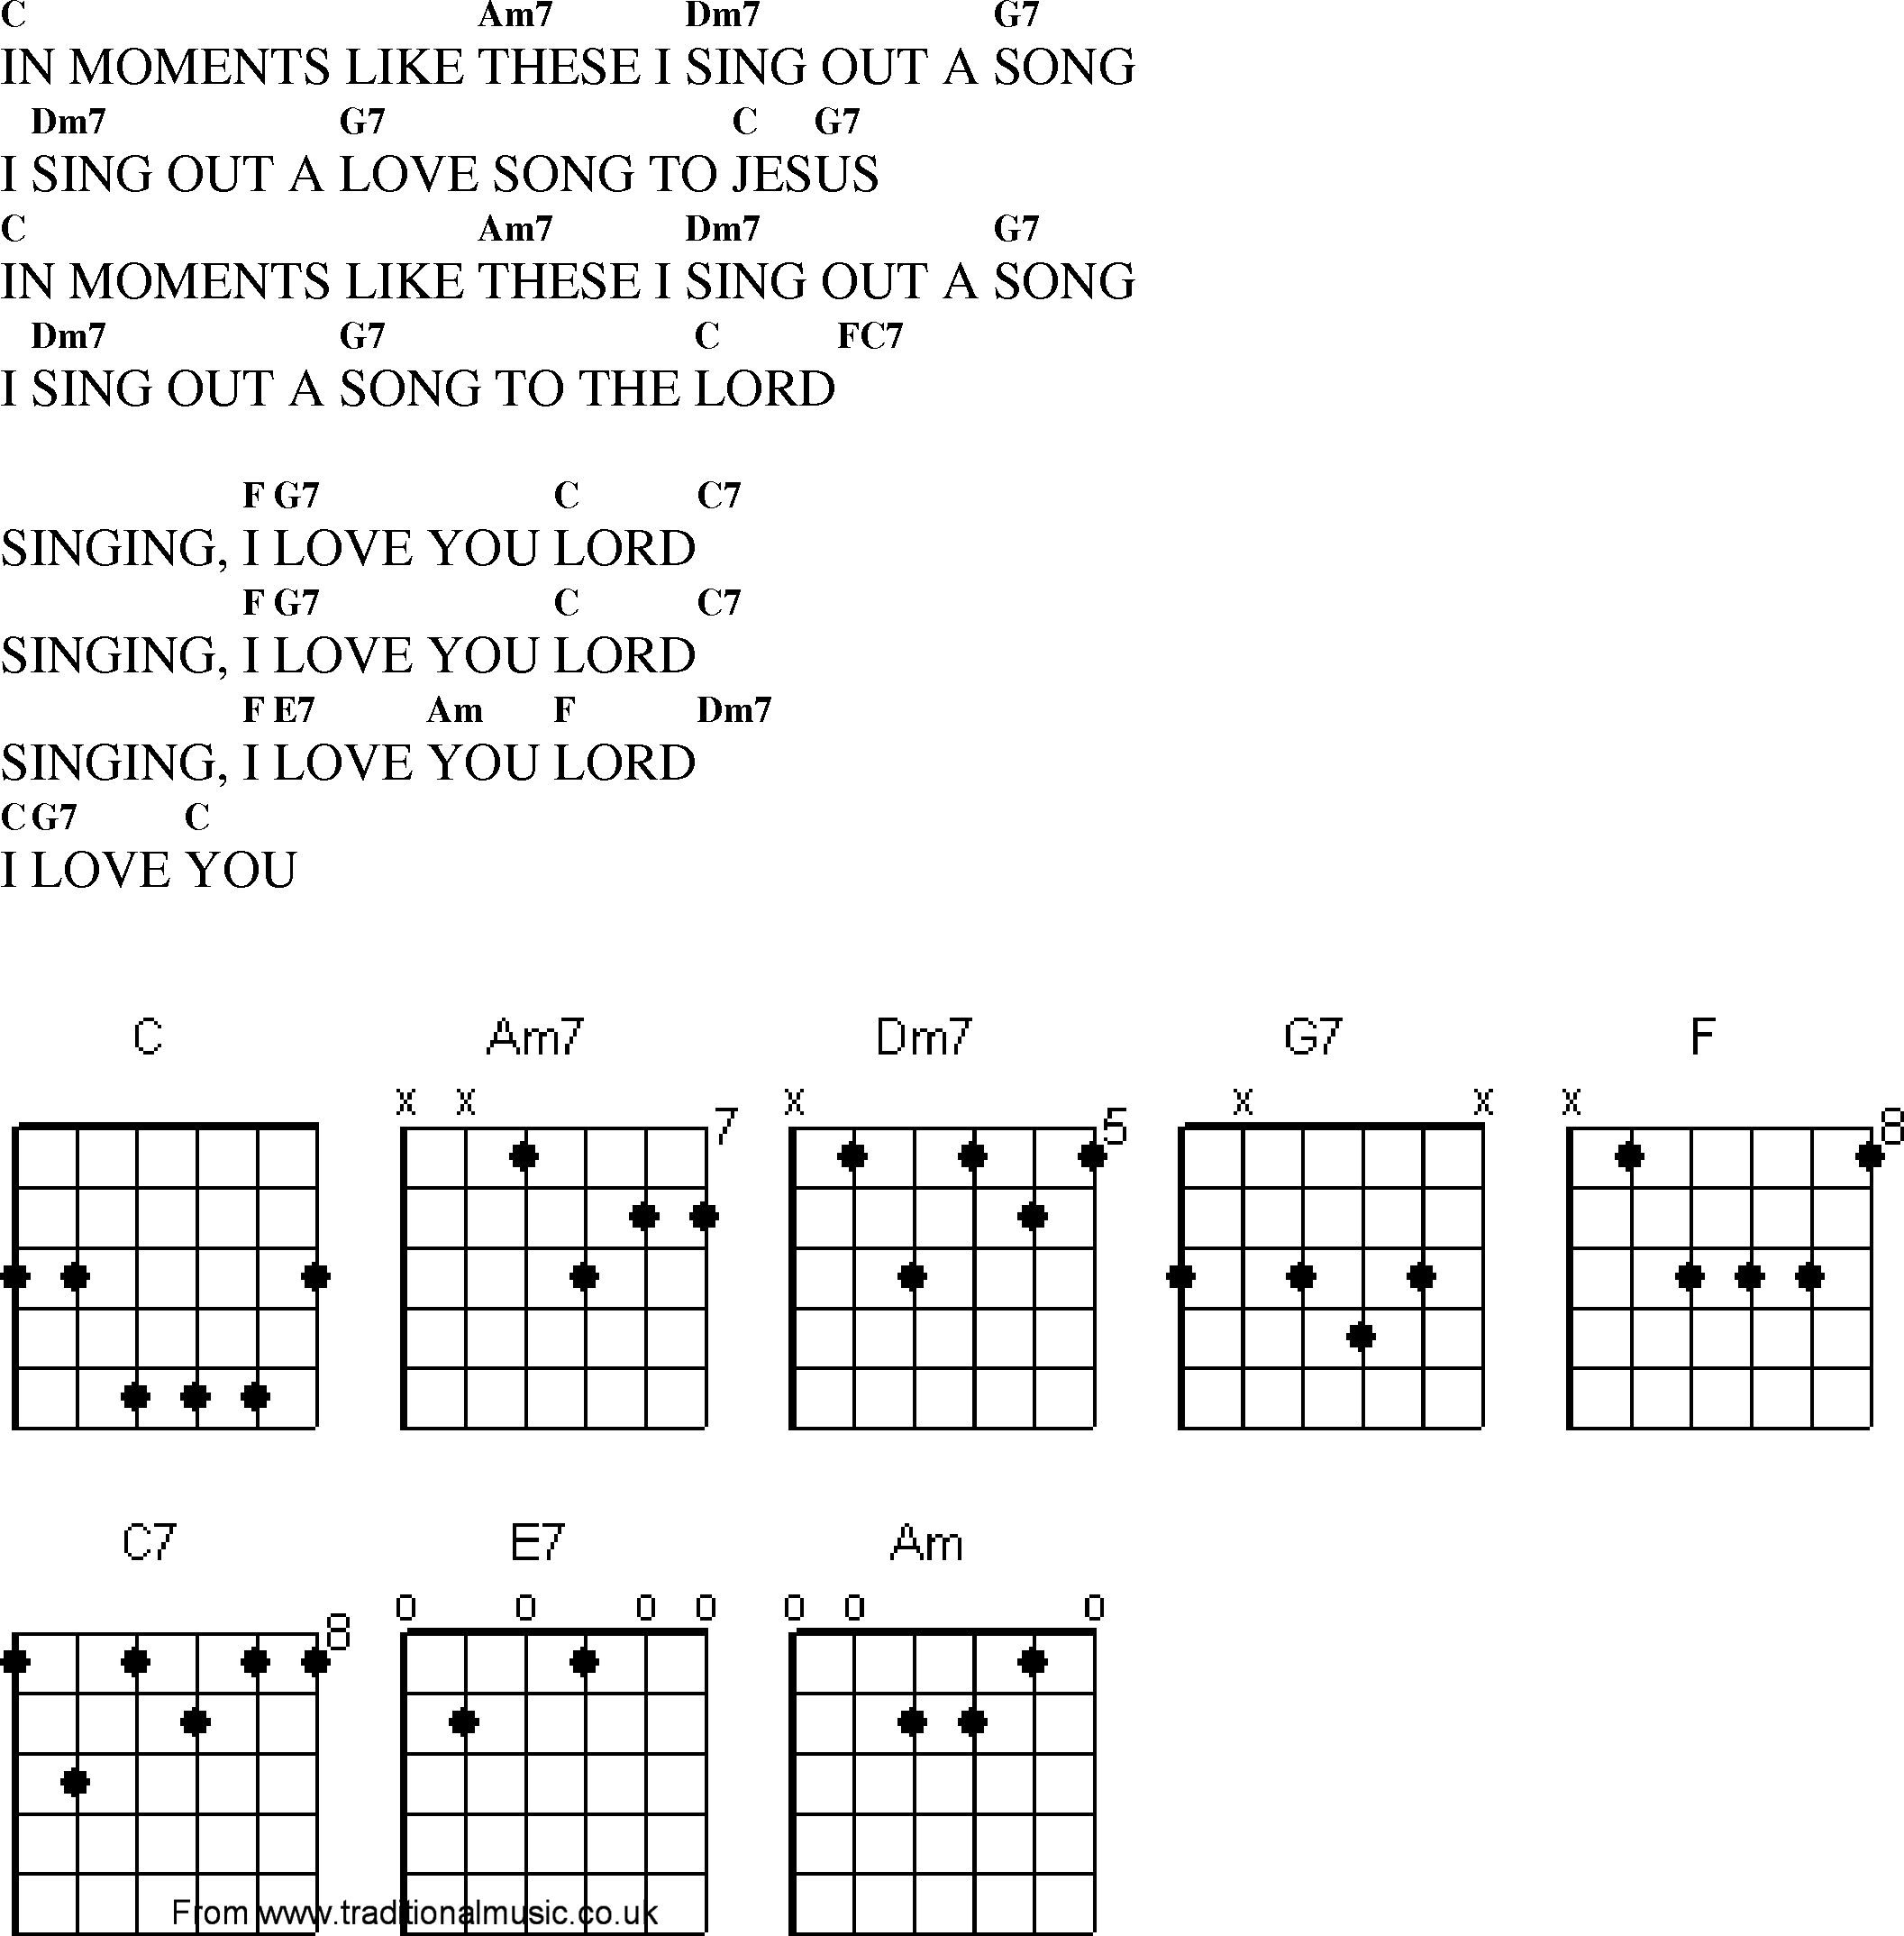 Gospel Song: in_moments_like_these, lyrics and chords.